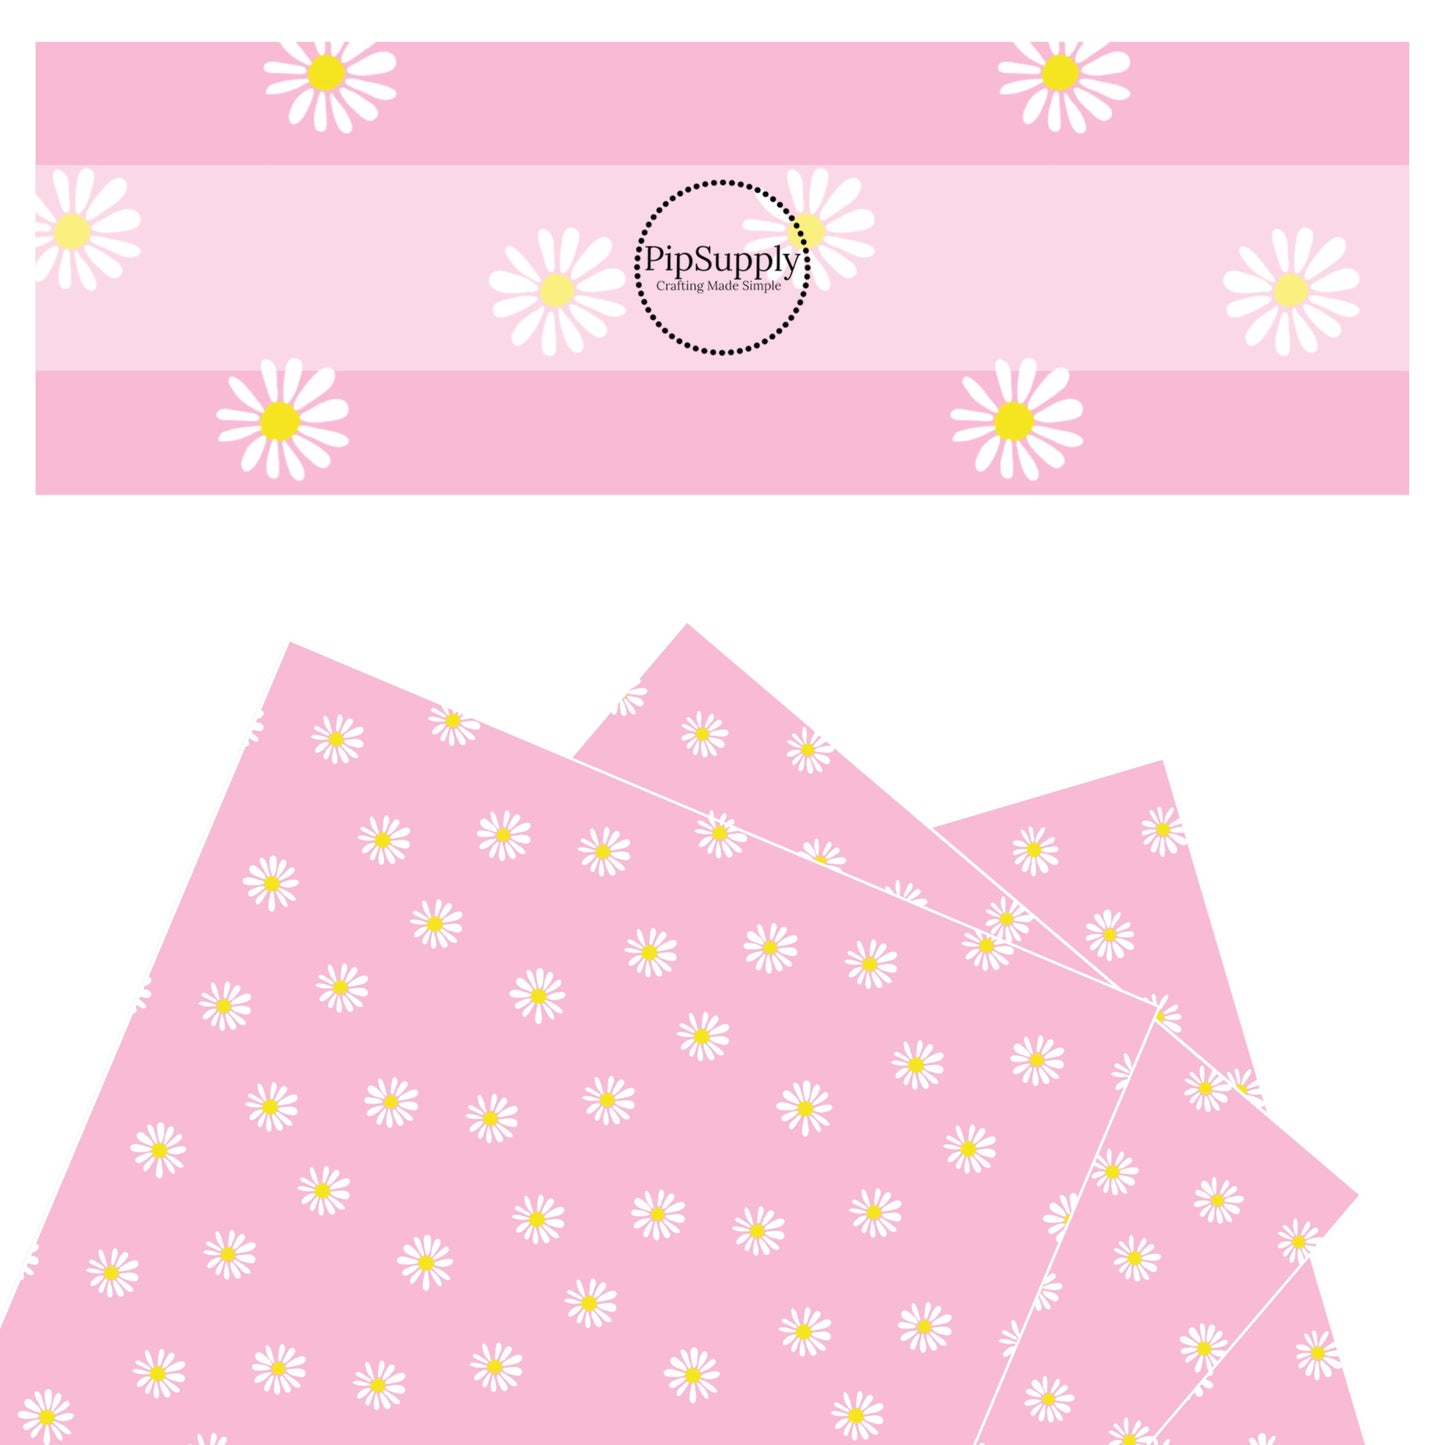 Custom Printed Light Pink Faux Leather with Tiny White Daisies throughout. 